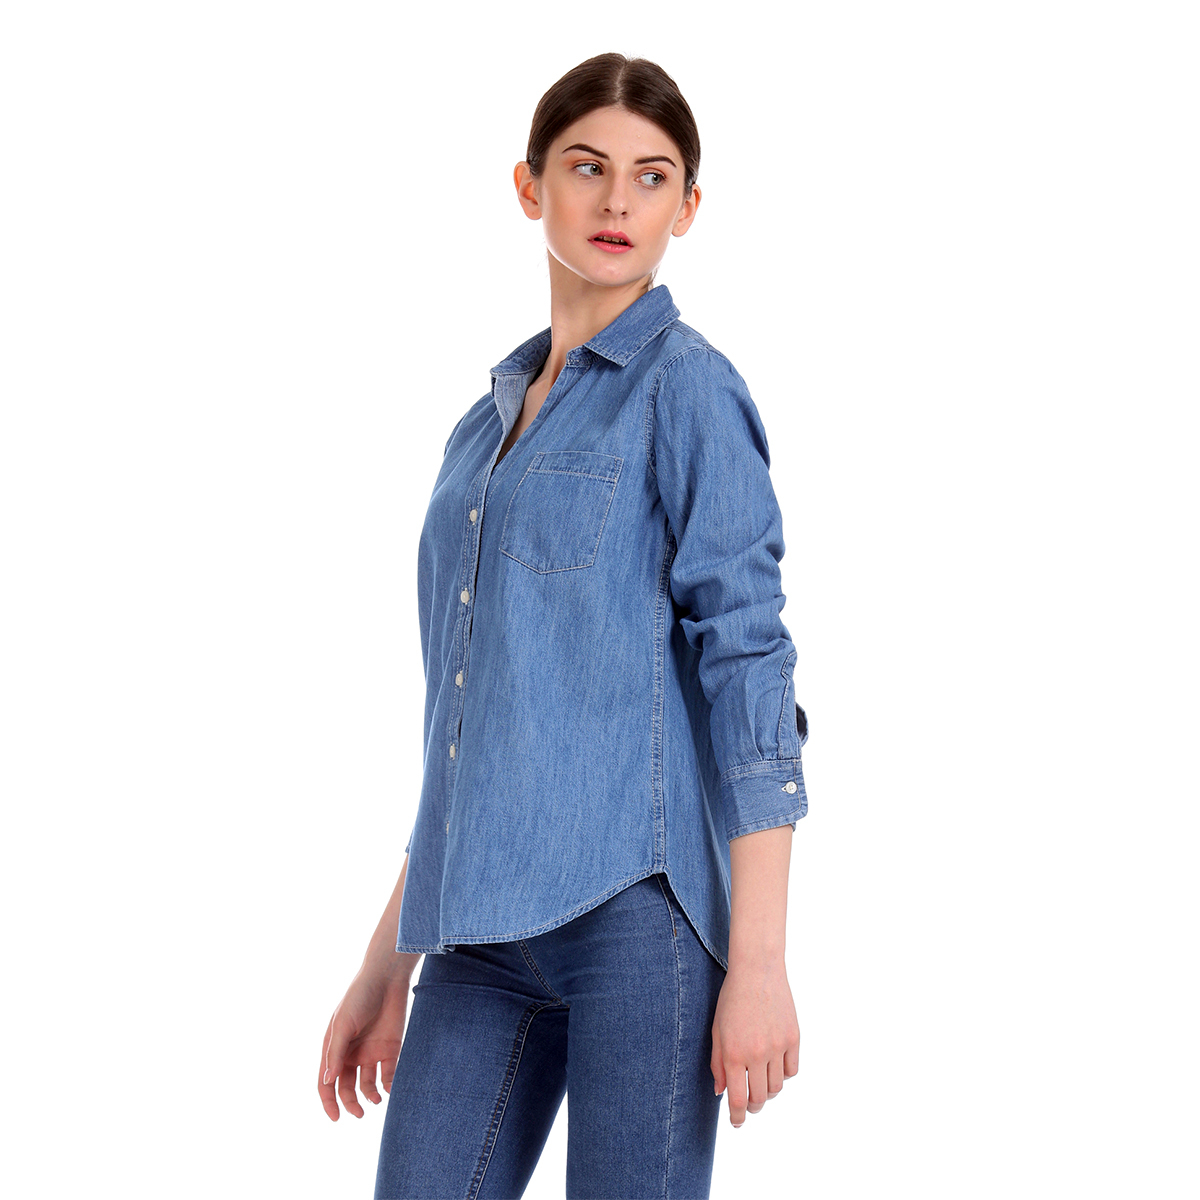 Gap Washed Regular Fit Full Sleeve Casual Shirt with Styled Button Placket & Patch Pocket - Indigo